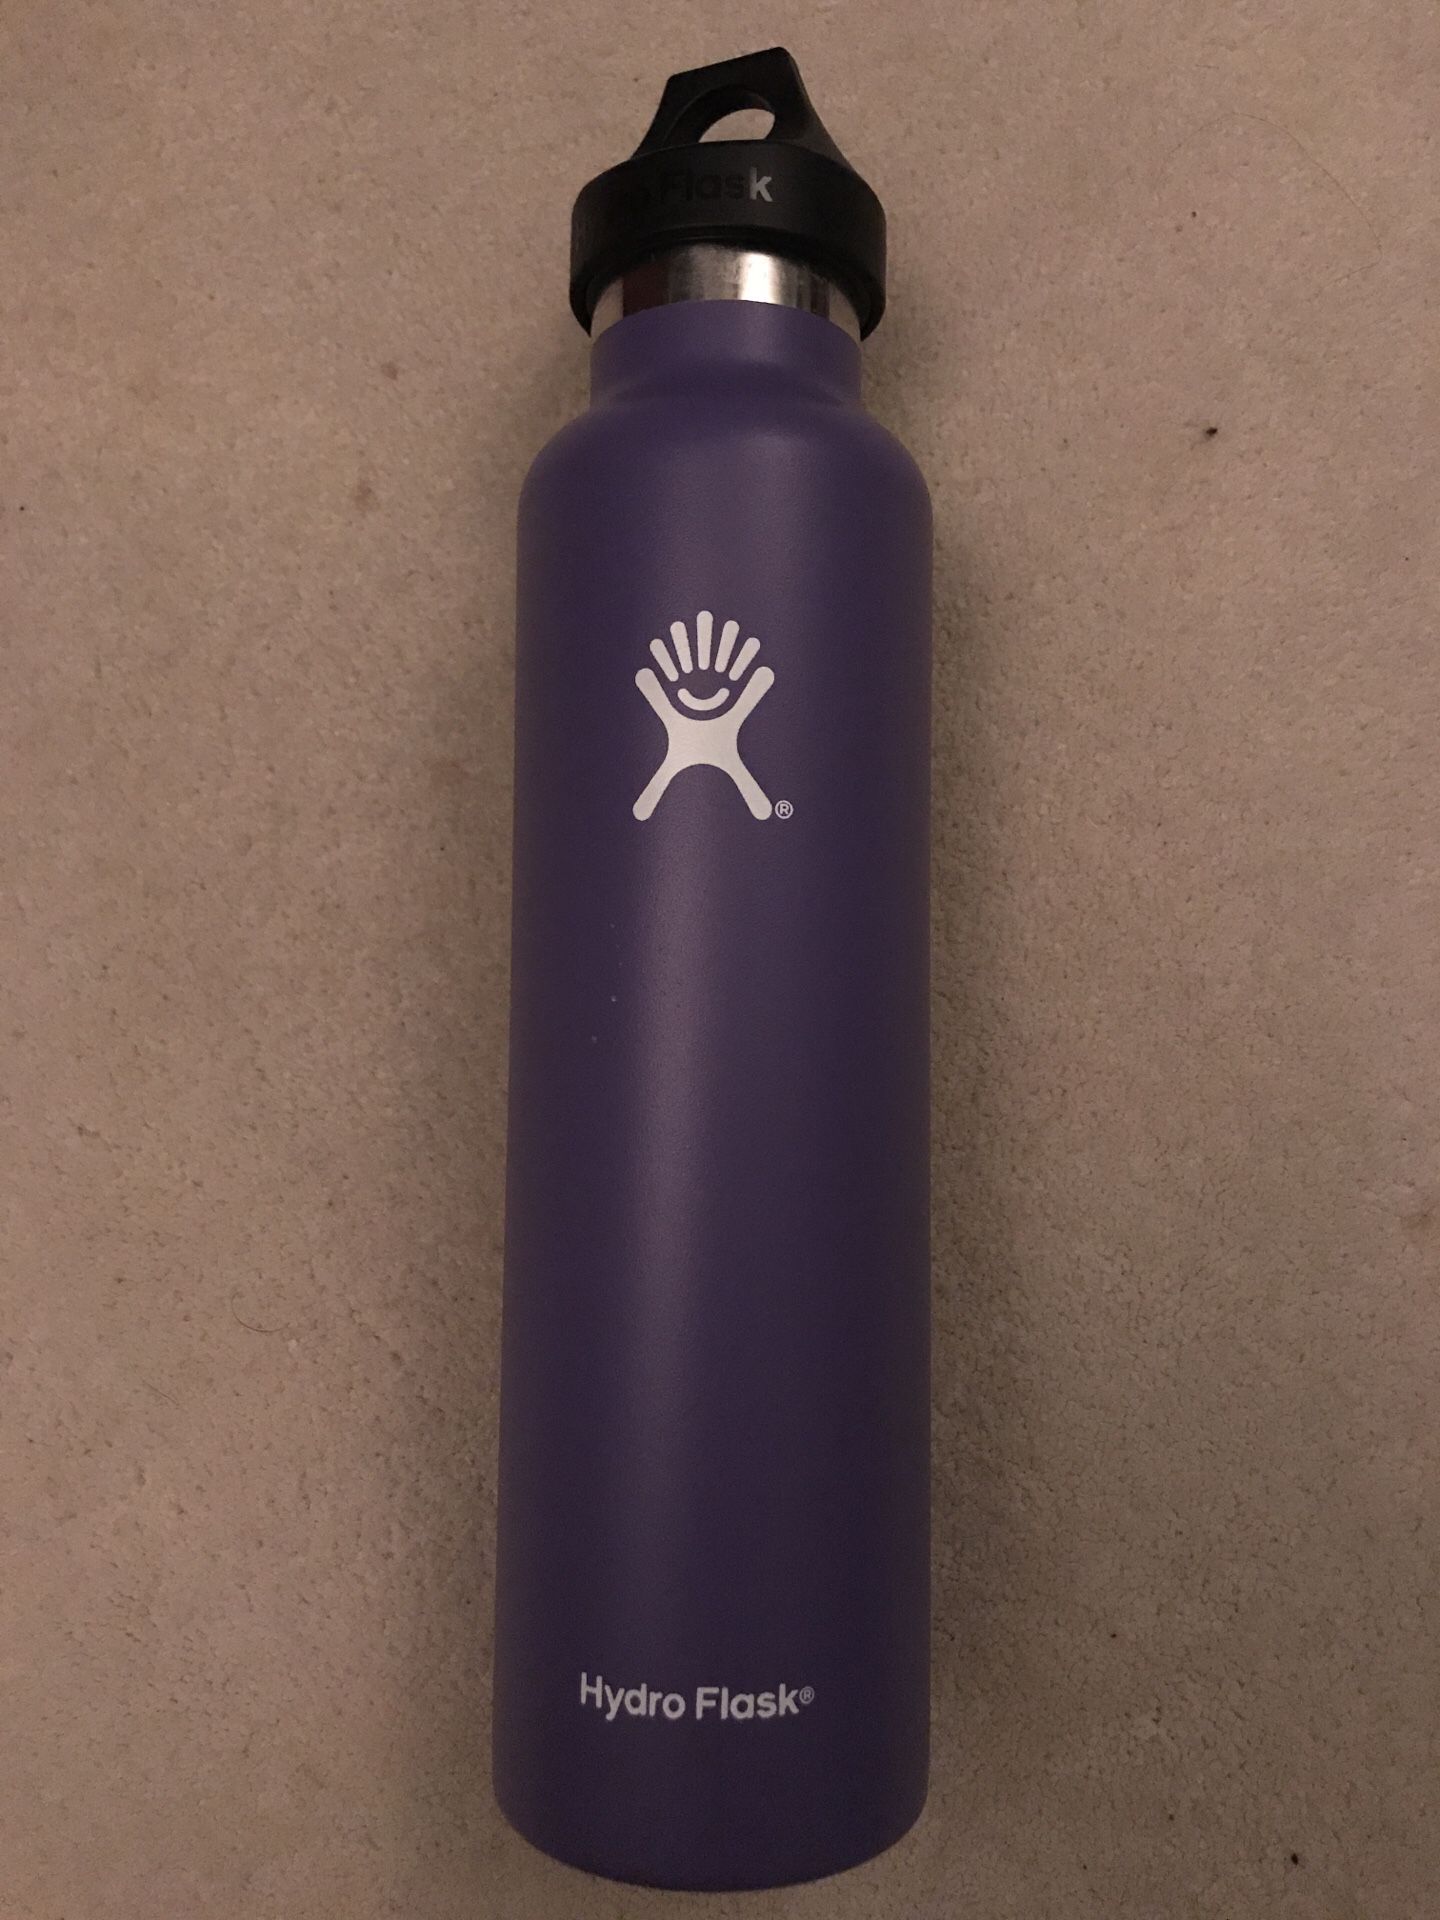 Hydro Flask Lunch Tote - 8 Liter for Sale in San Leandro, CA - OfferUp